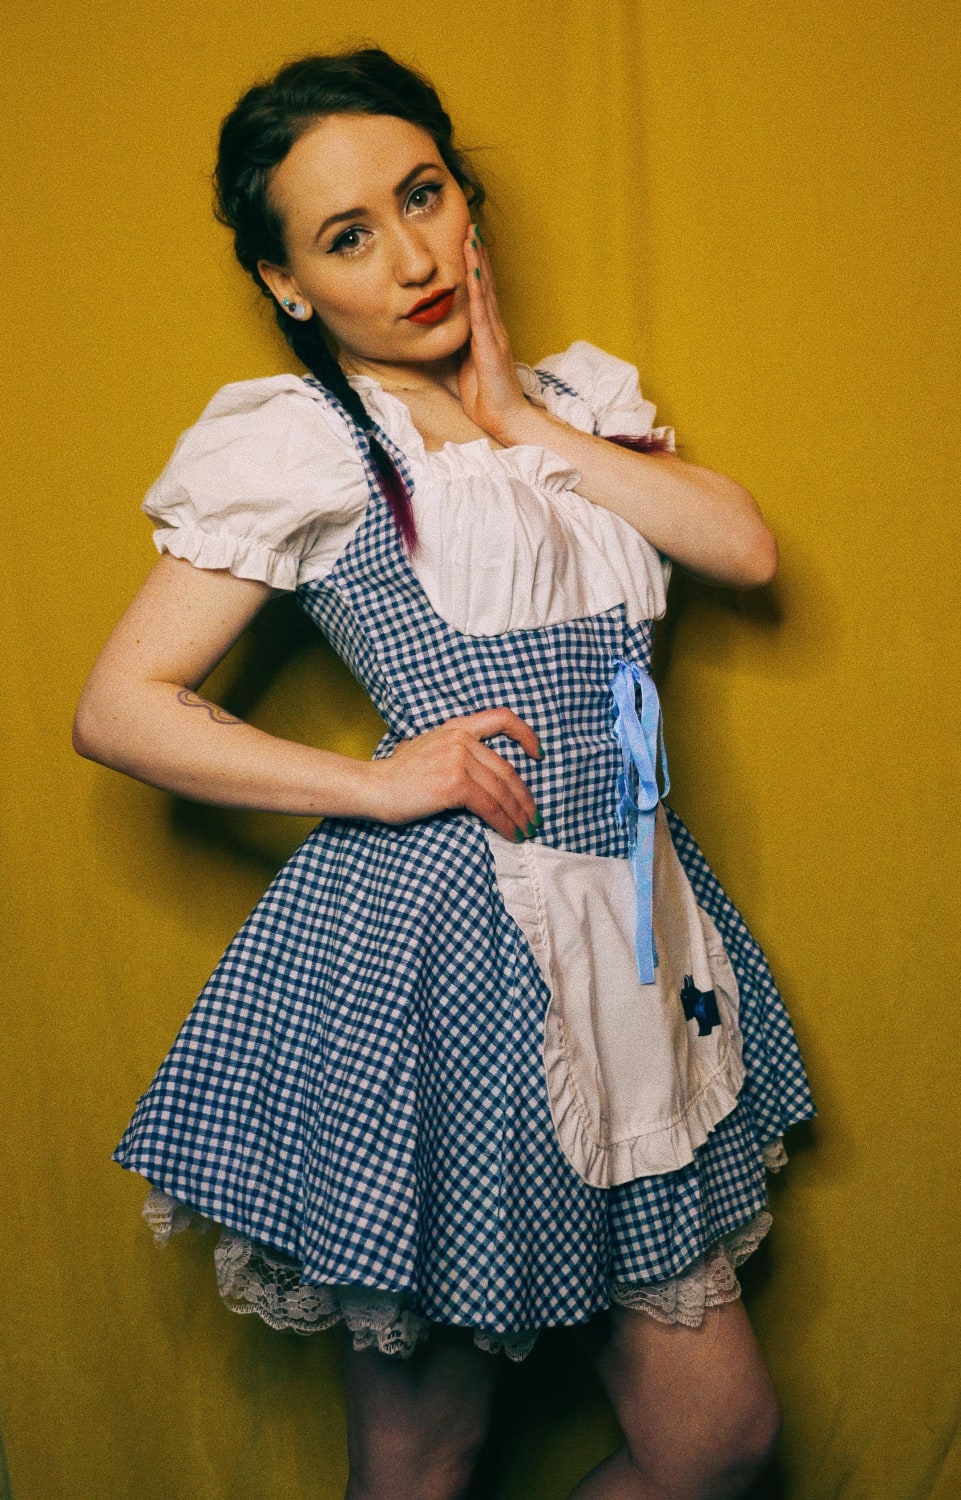 Dorothy from The Wizard Of Oz [self]